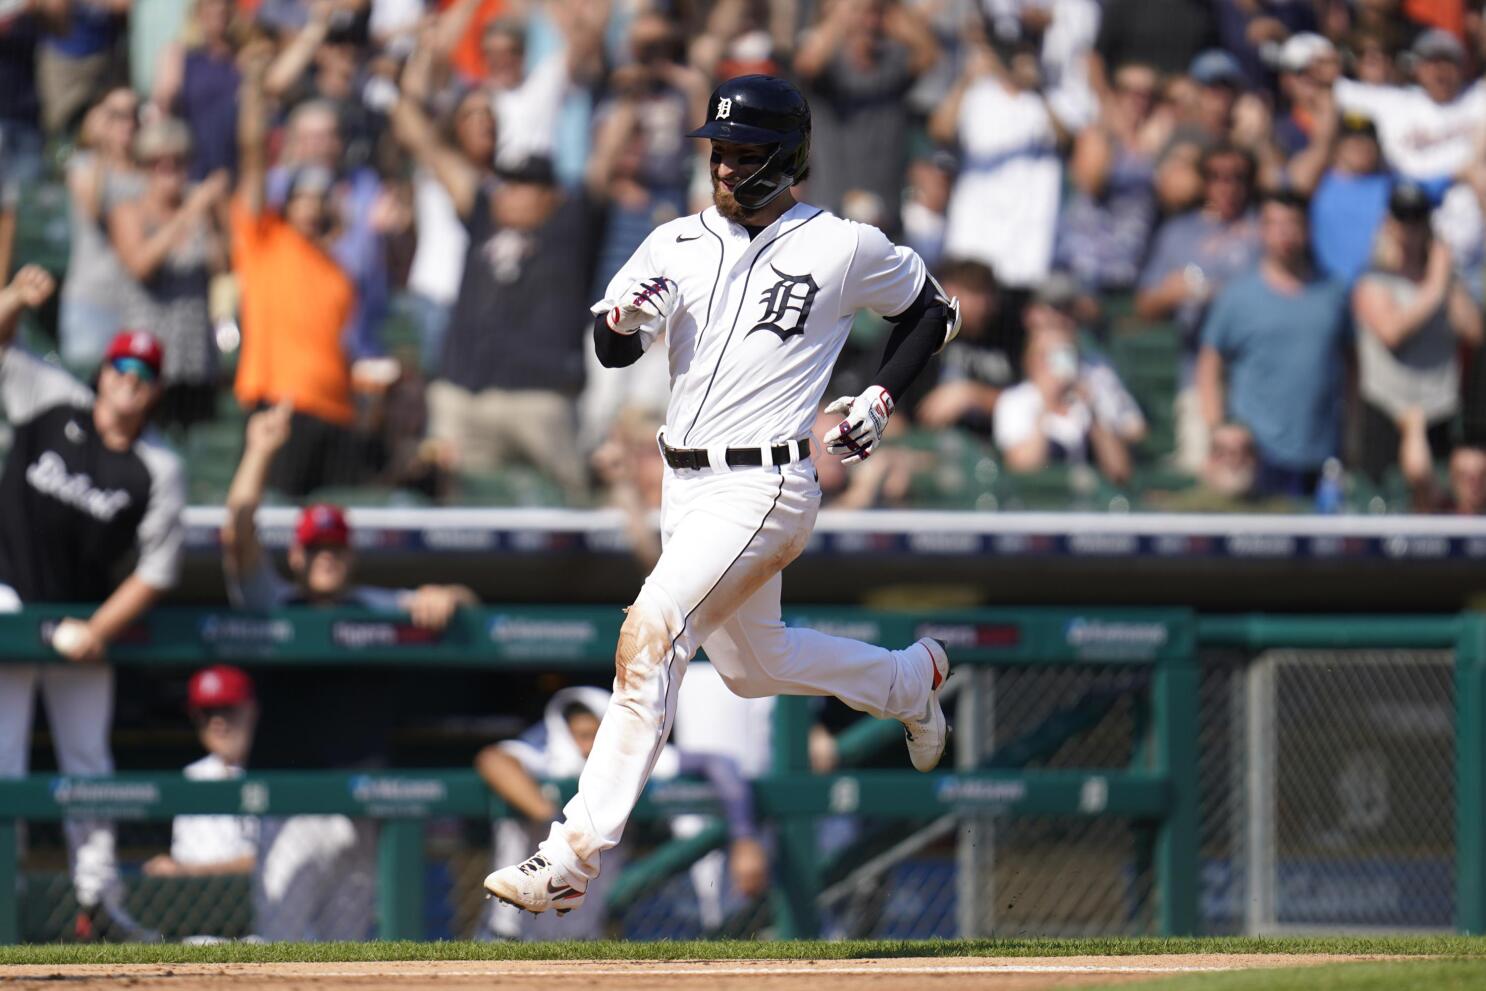 Haase pair of 3-run HRs, inside-the-parker, Tigers top WSox